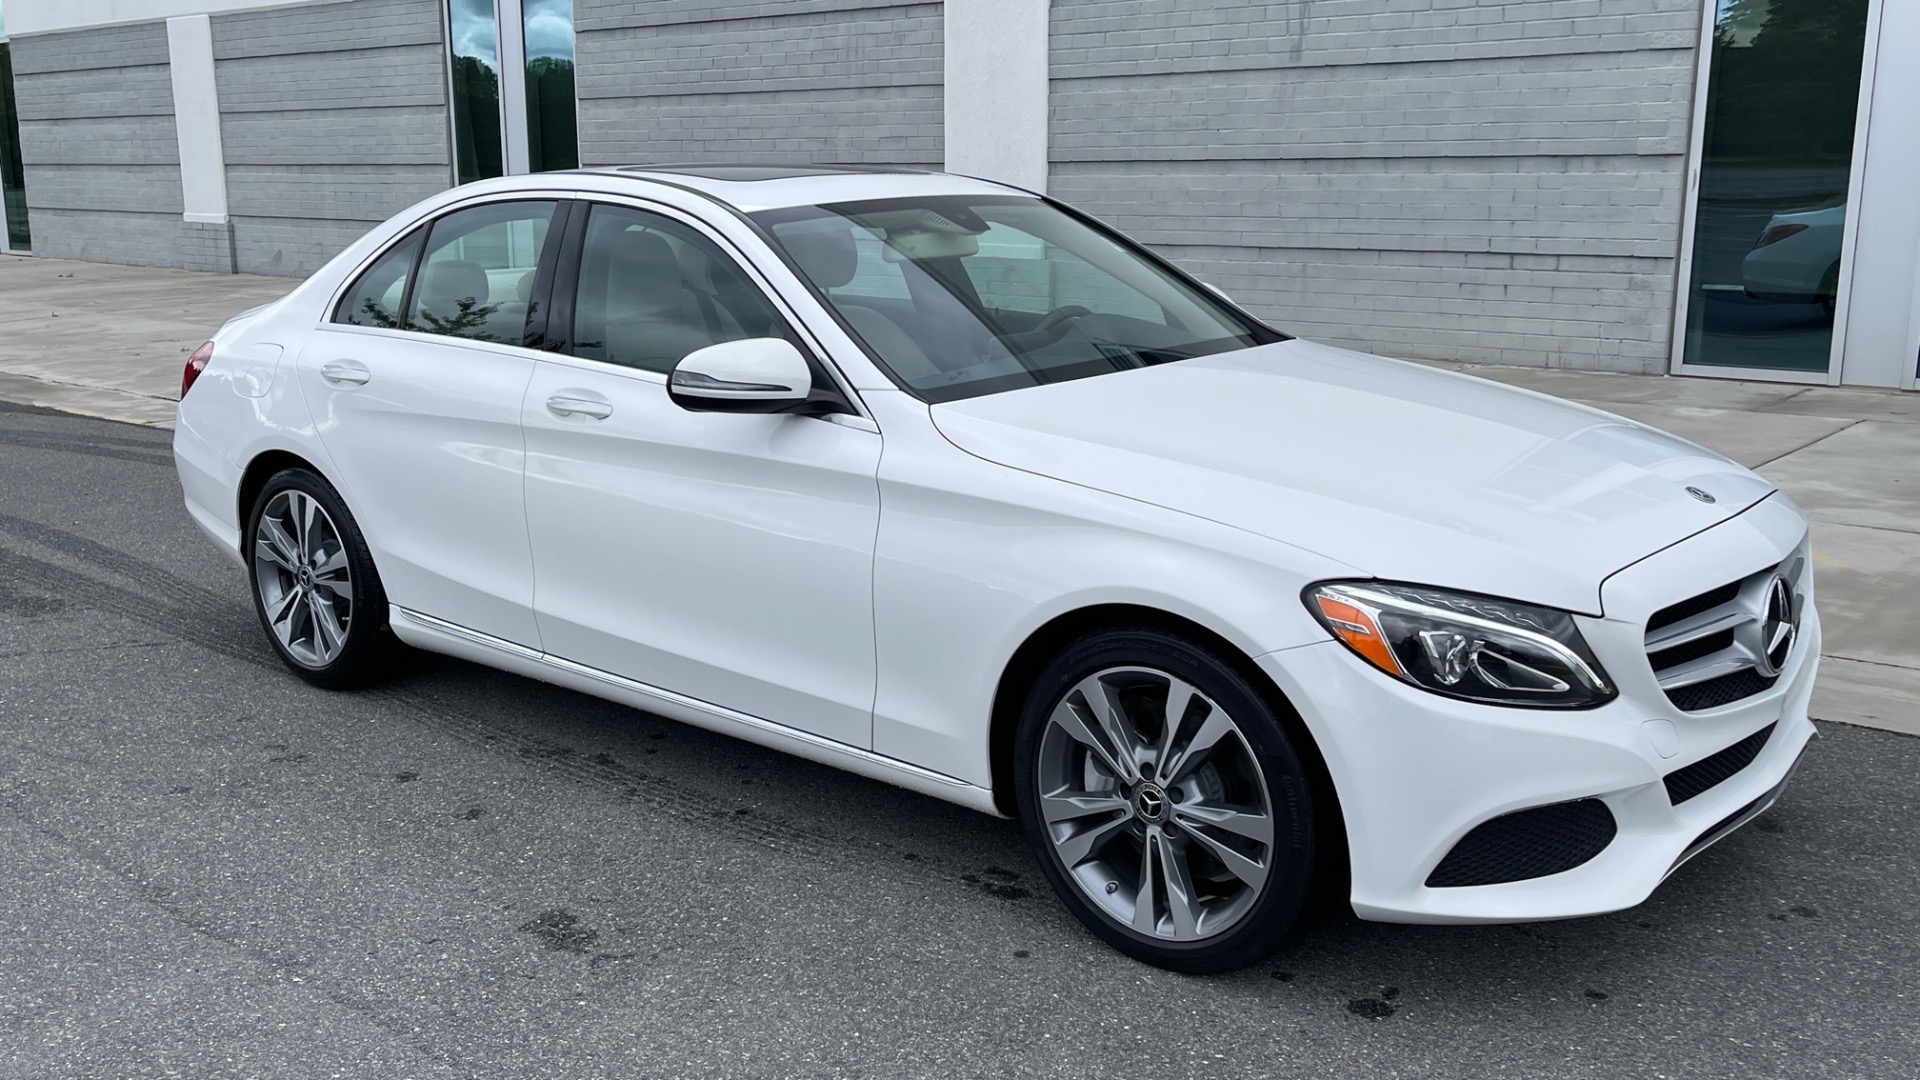 Used 2018 Mercedes-Benz C-Class C 300 / PREMIUM PACKAGE / 18IN WHEELS / HEATED FRONT SEATS / LED HEADLIGHTS for sale $27,495 at Formula Imports in Charlotte NC 28227 7